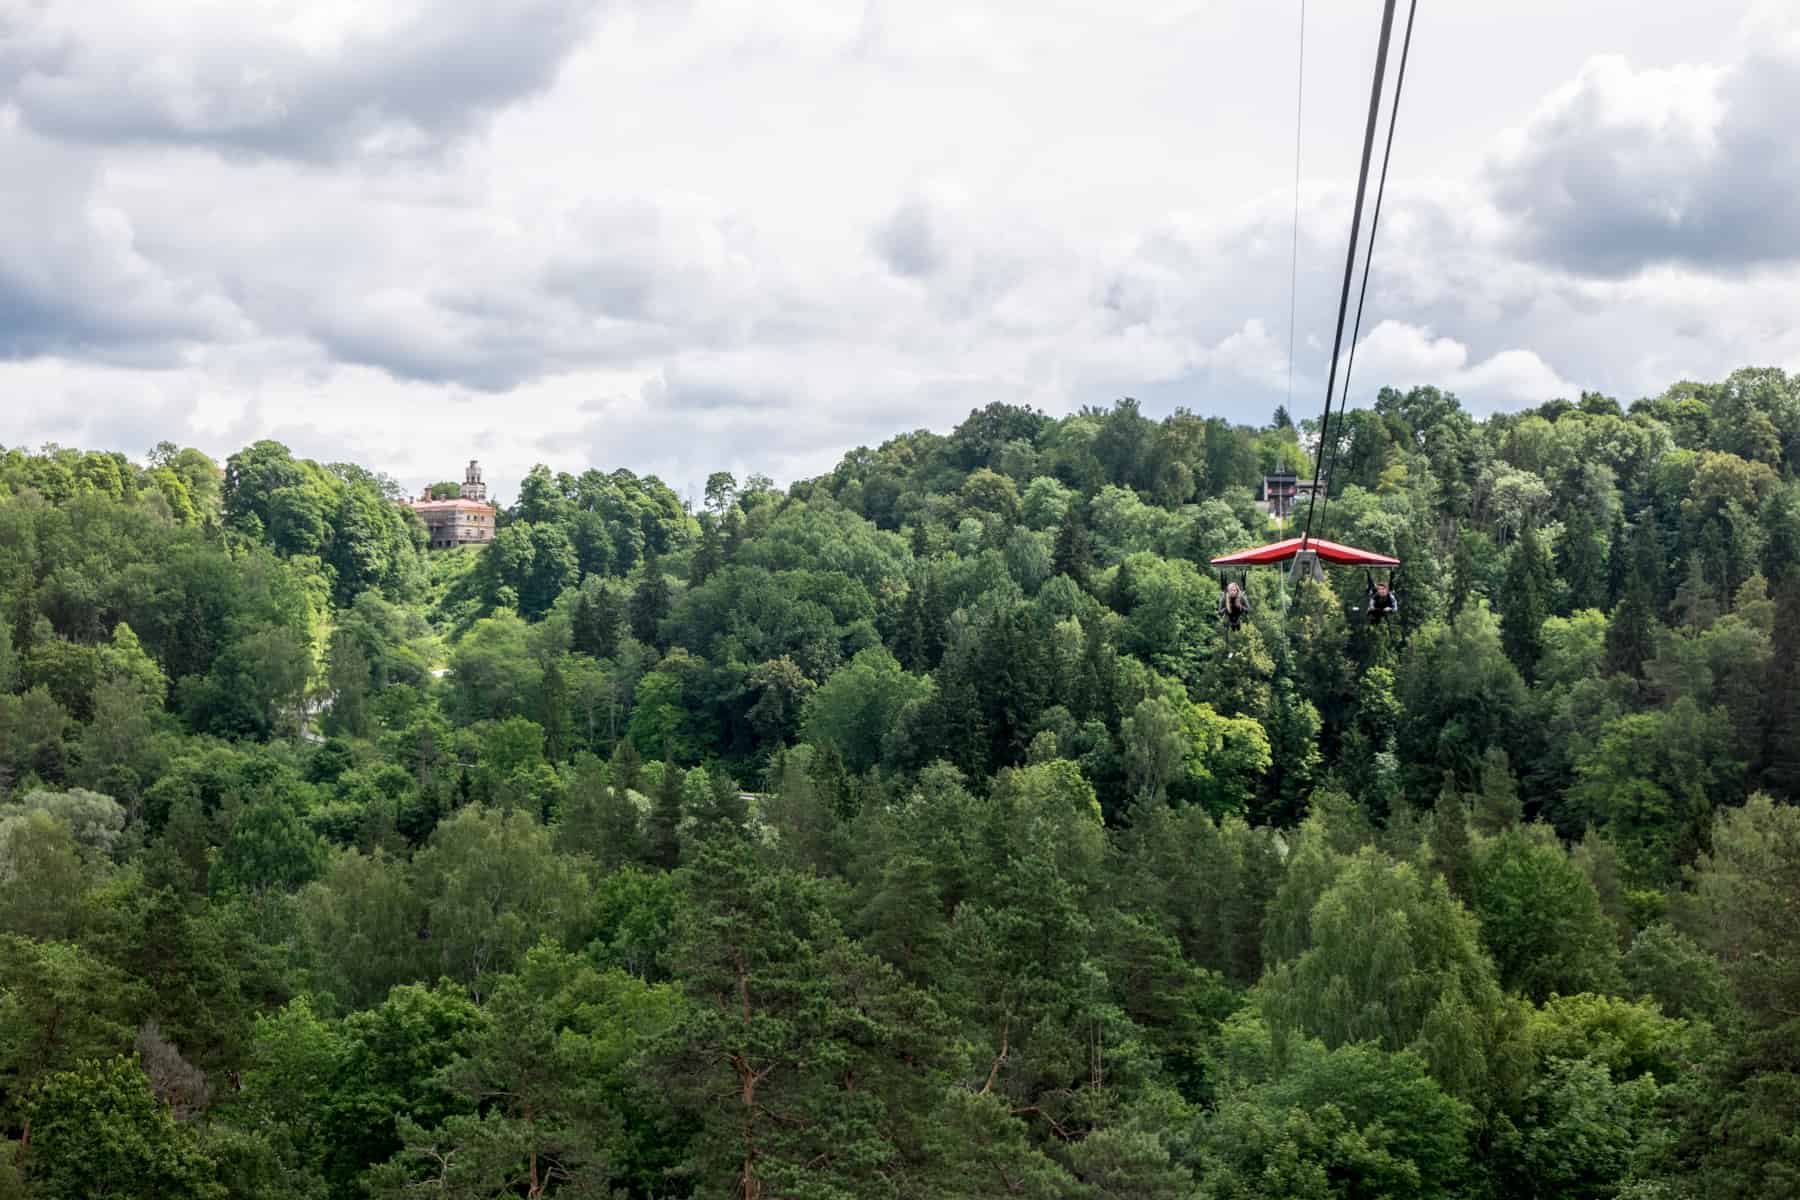 Two people glide through the air on a zipline against a backdrop of dense forest and a castle in Sigulda, Latvia